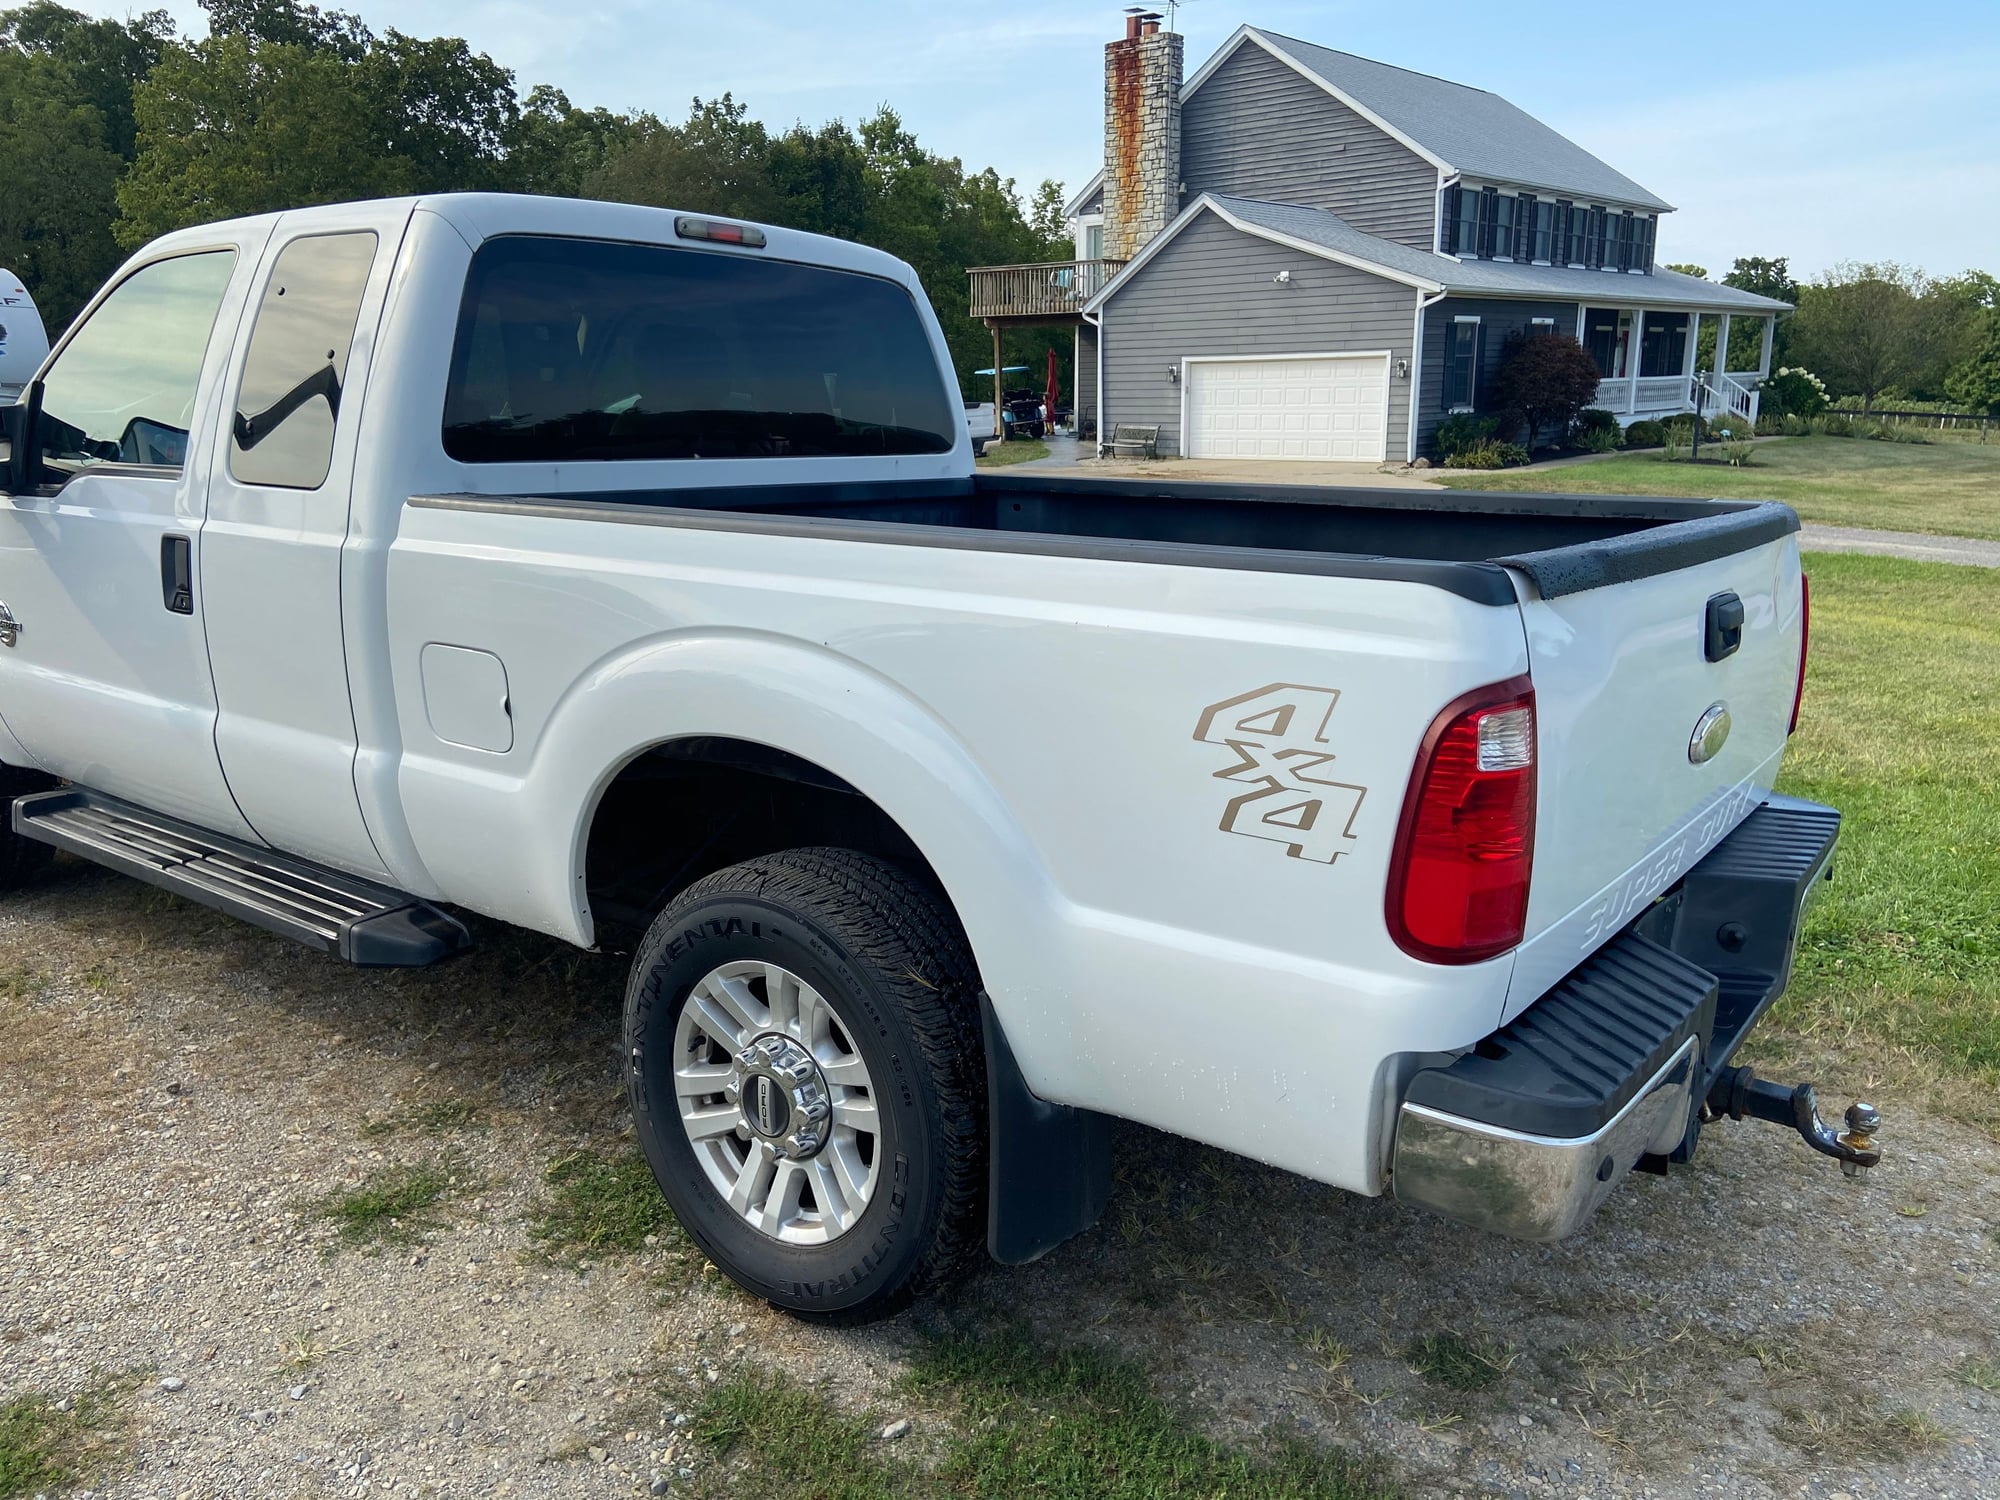 2012 Ford F-250 Super Duty - '12 F250 SuperDuty Diesel - Used - VIN 1FT7X2BT3CEB07614 - 60,789 Miles - 8 cyl - 4WD - Automatic - Truck - White - Hamilton, OH 45013, United States